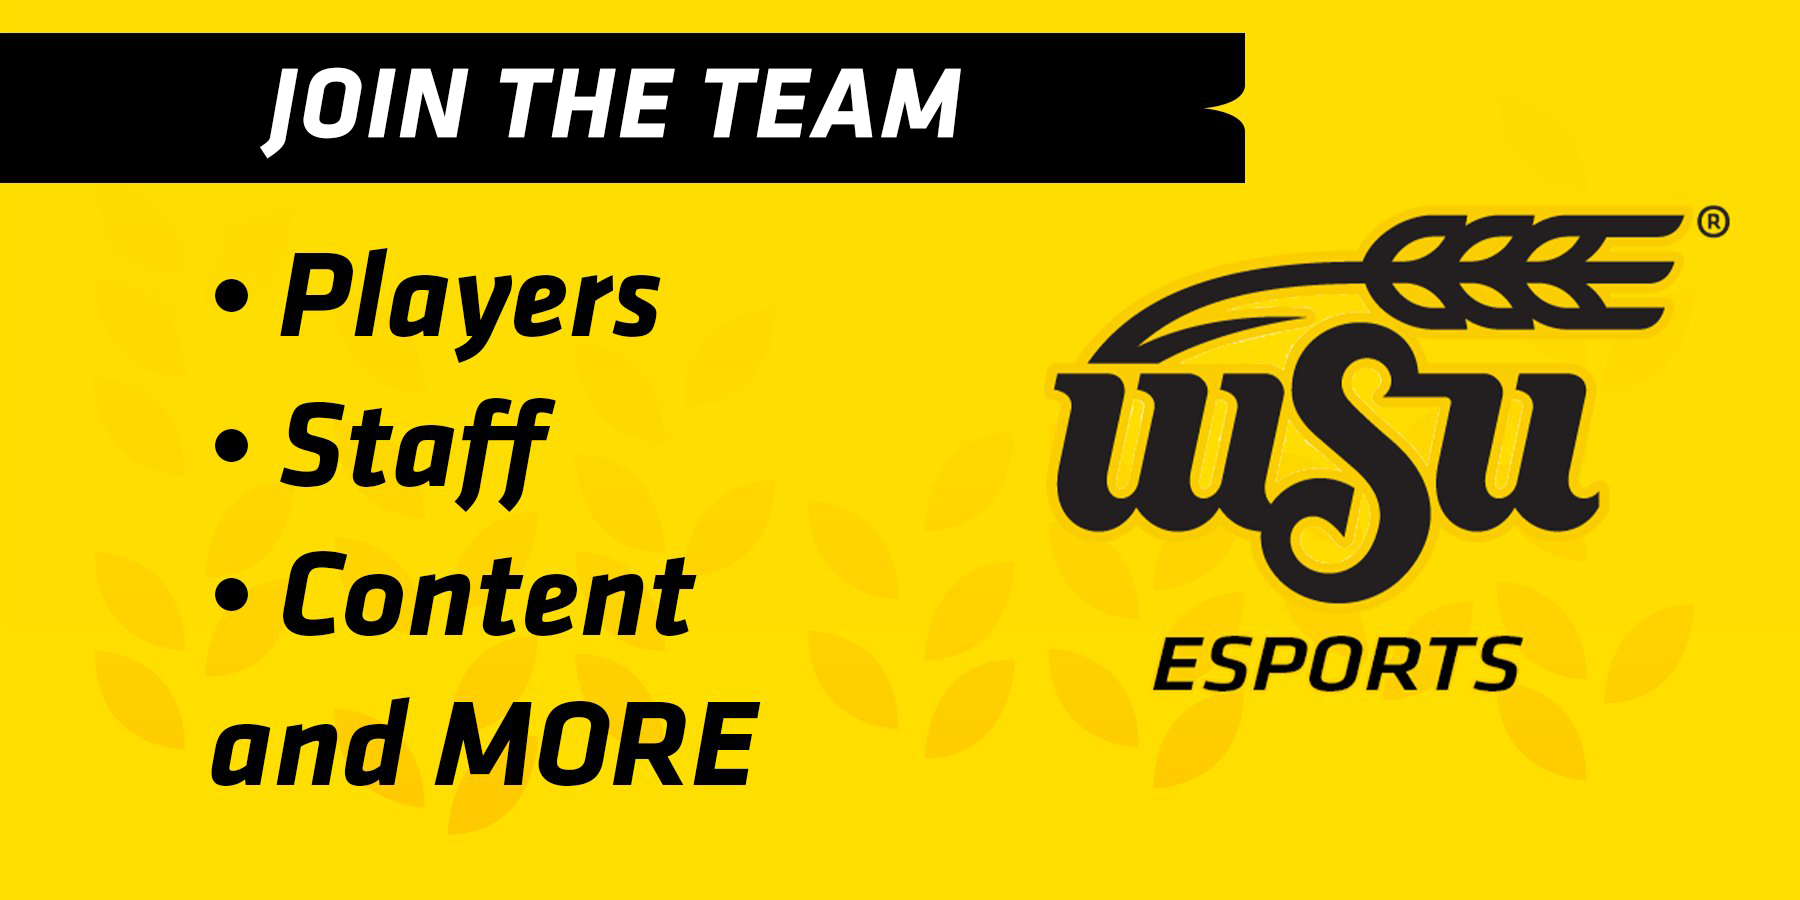 wsu esports logo with text now looking for players, staff, content and more